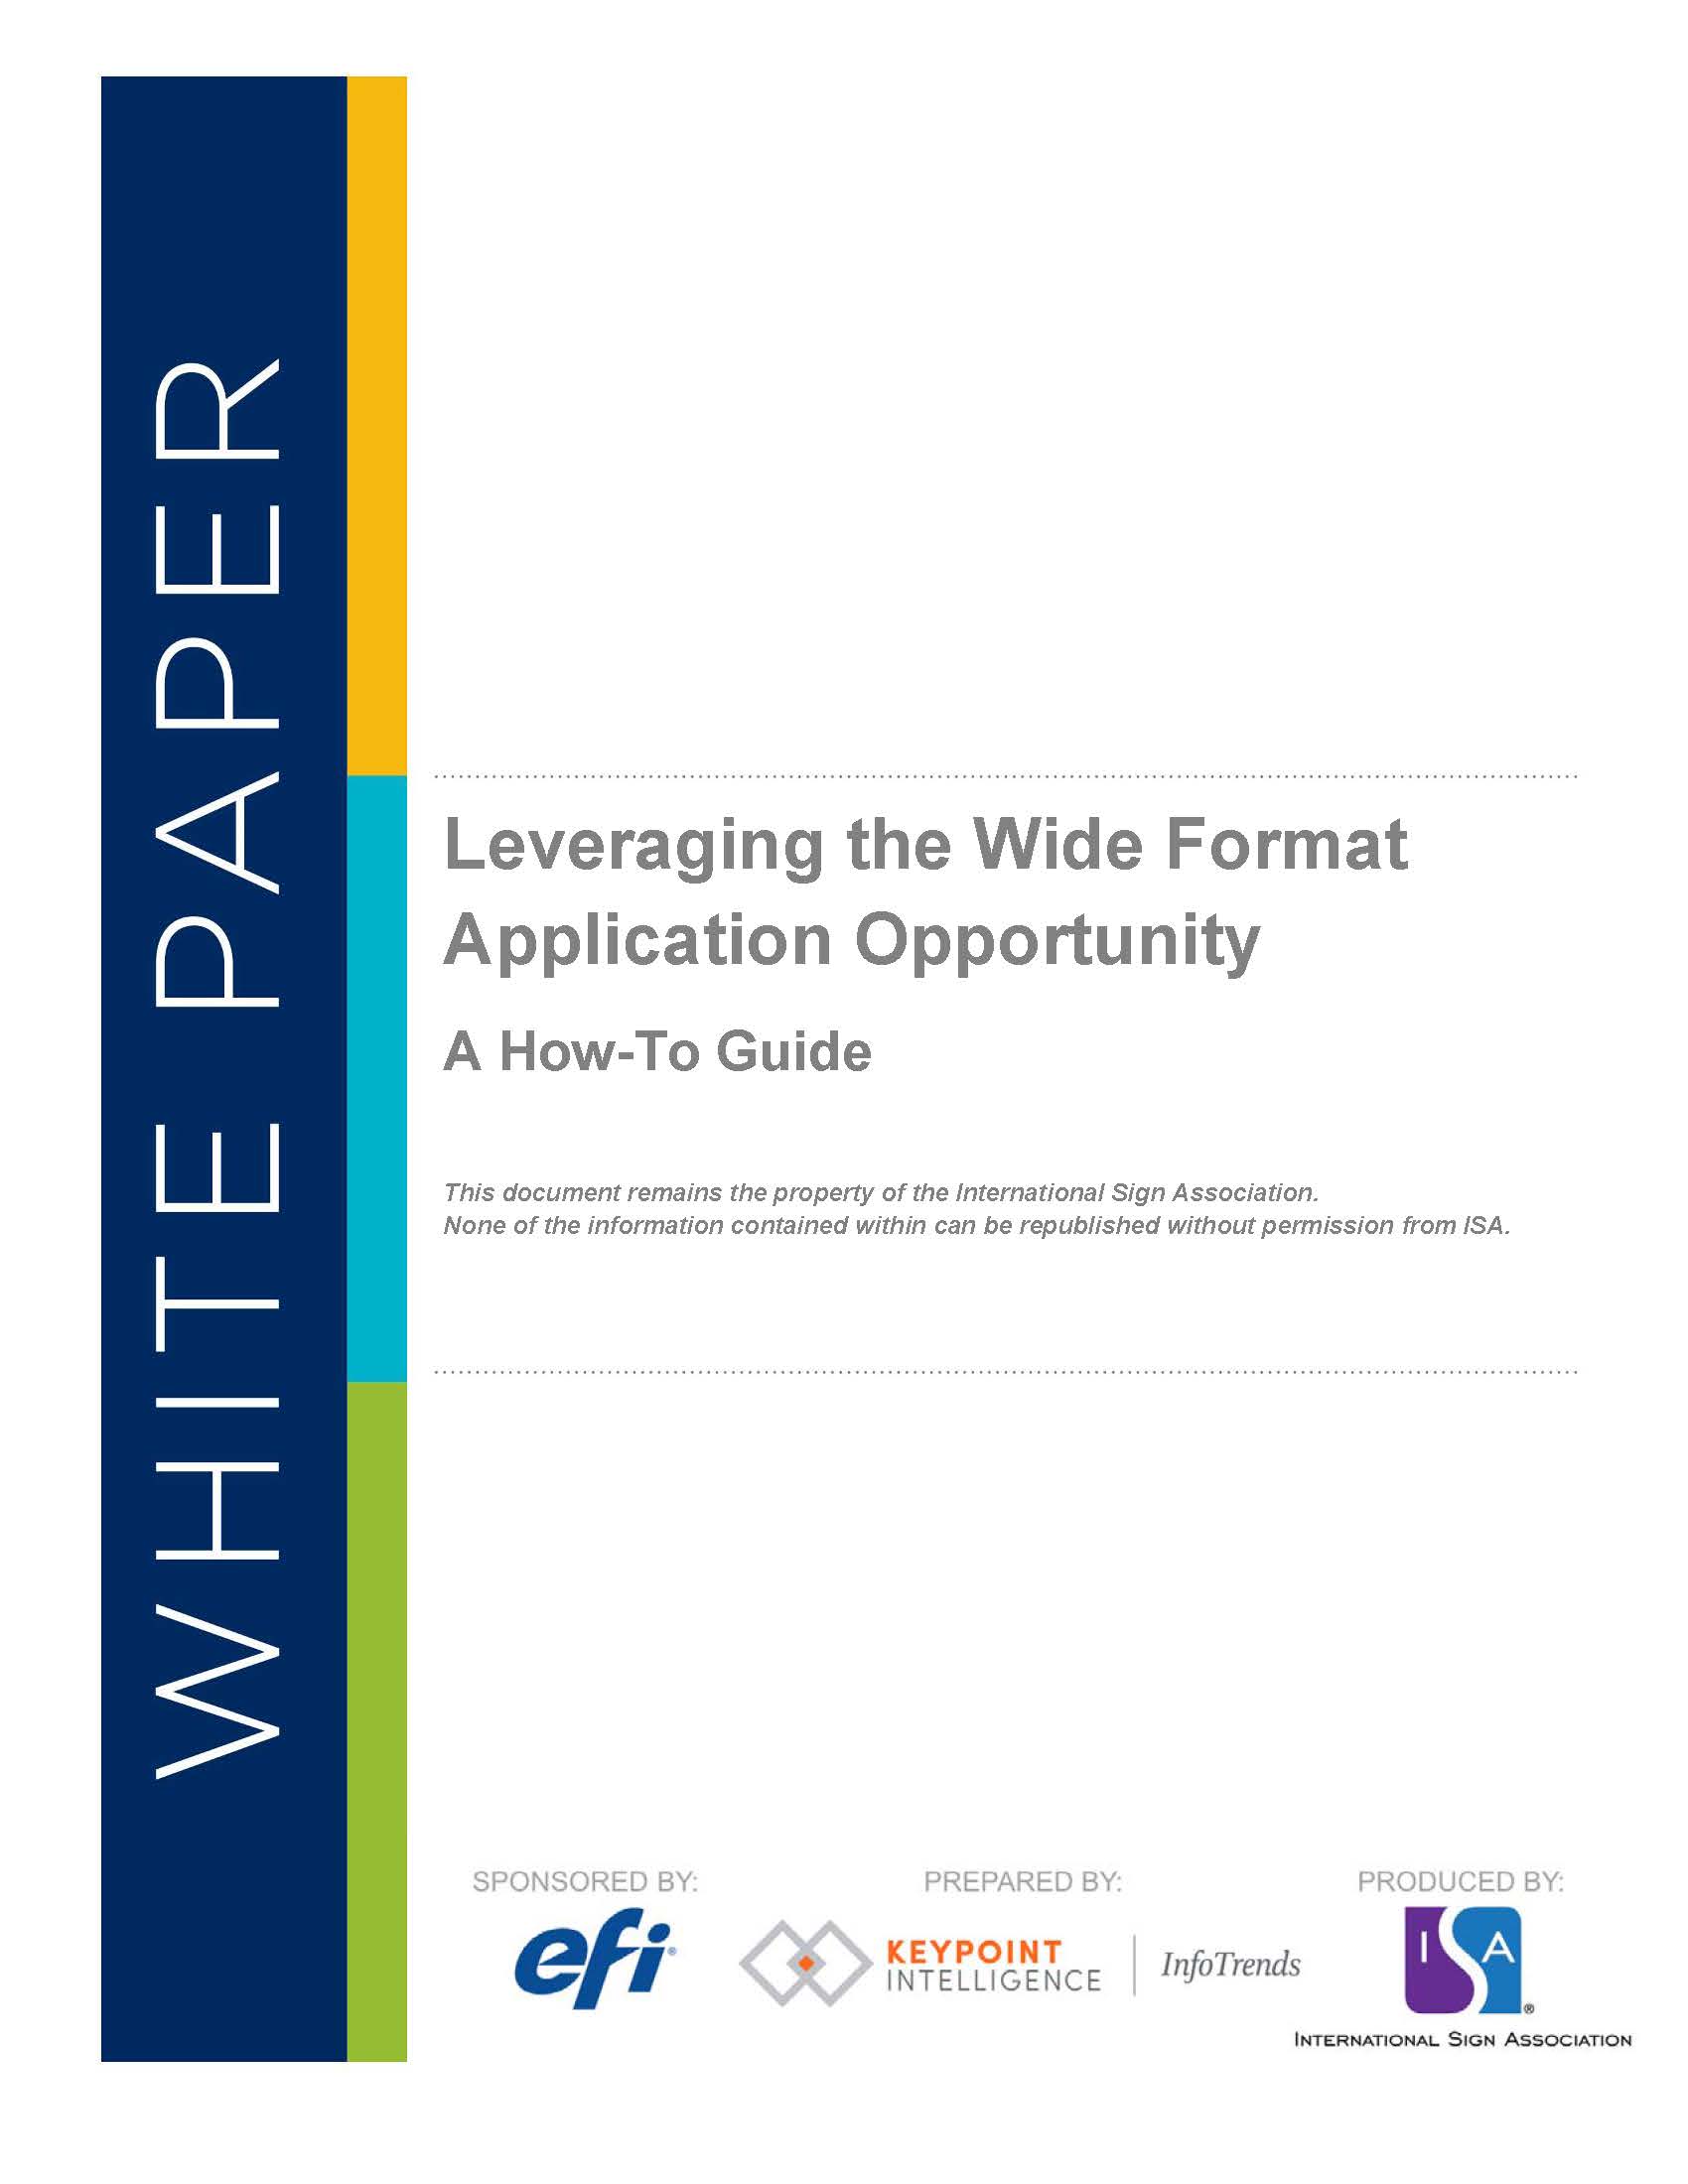 Leveraging the Wide Format Application Opportunity: A How-To Guide